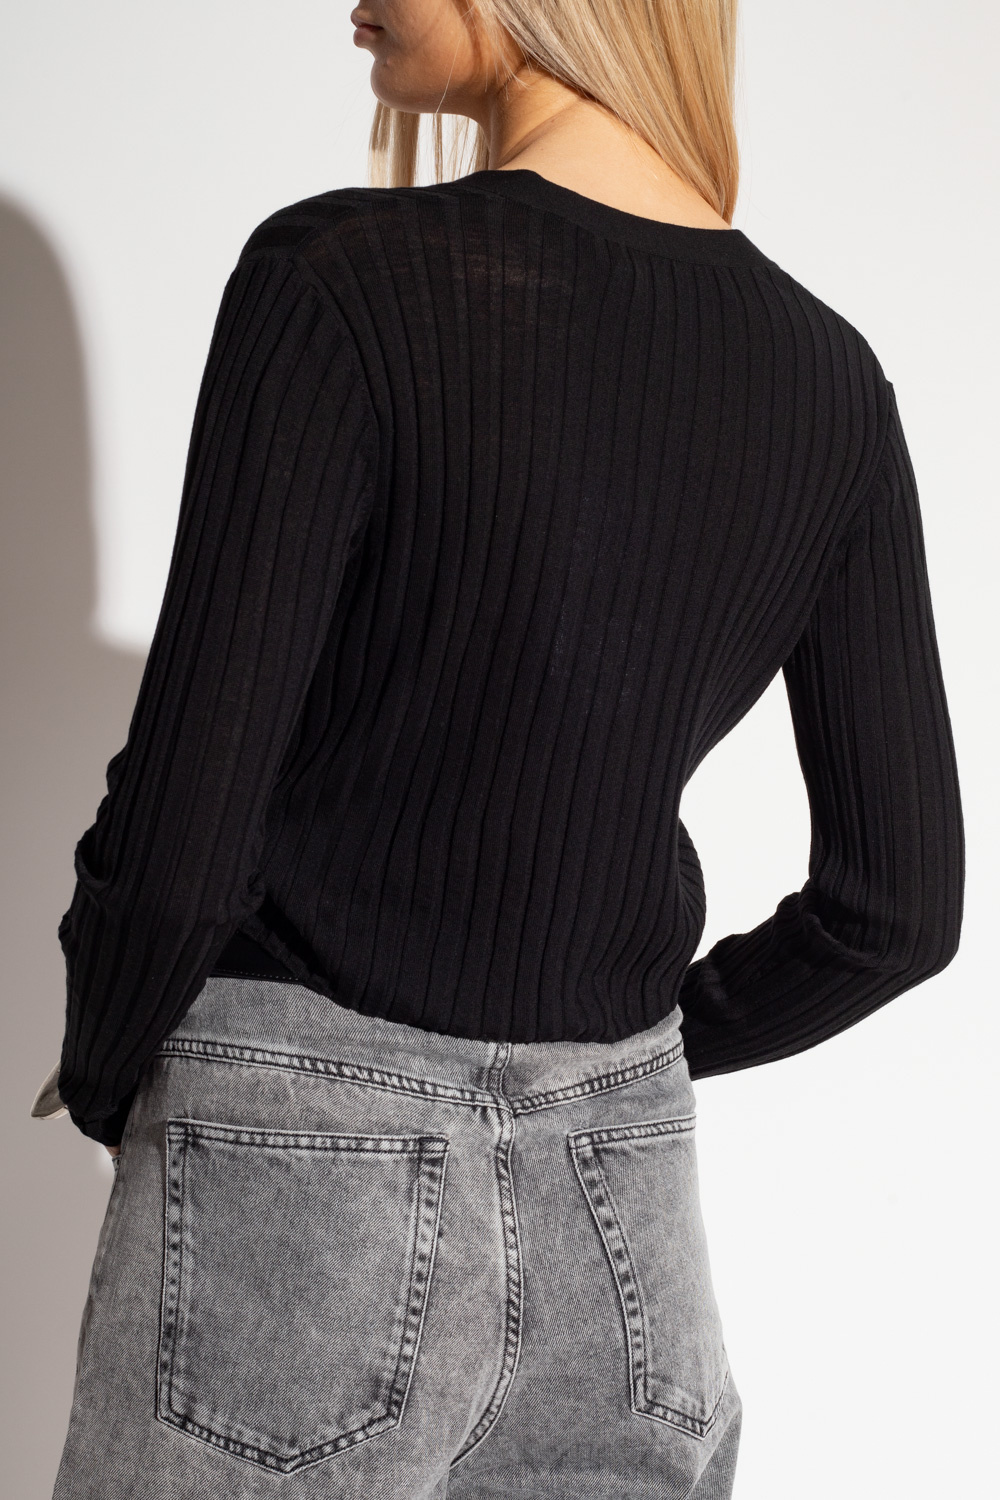 Ribbed Band Sweater - Size XXL - Black - Women's Tops - Meena